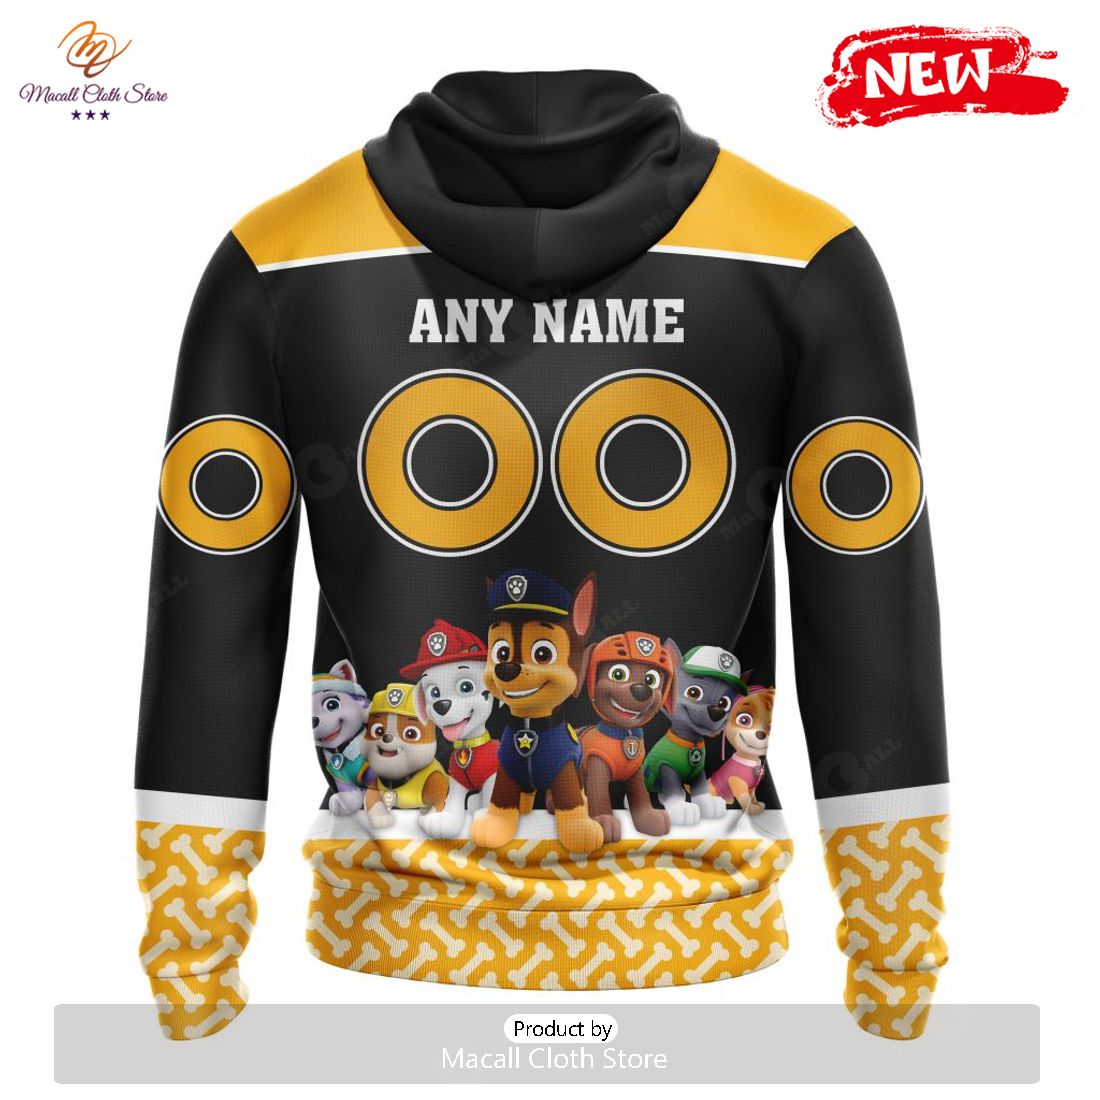 Customized Bruins Bear Hoodie 3D Paw Patrol Gift - Personalized Gifts:  Family, Sports, Occasions, Trending